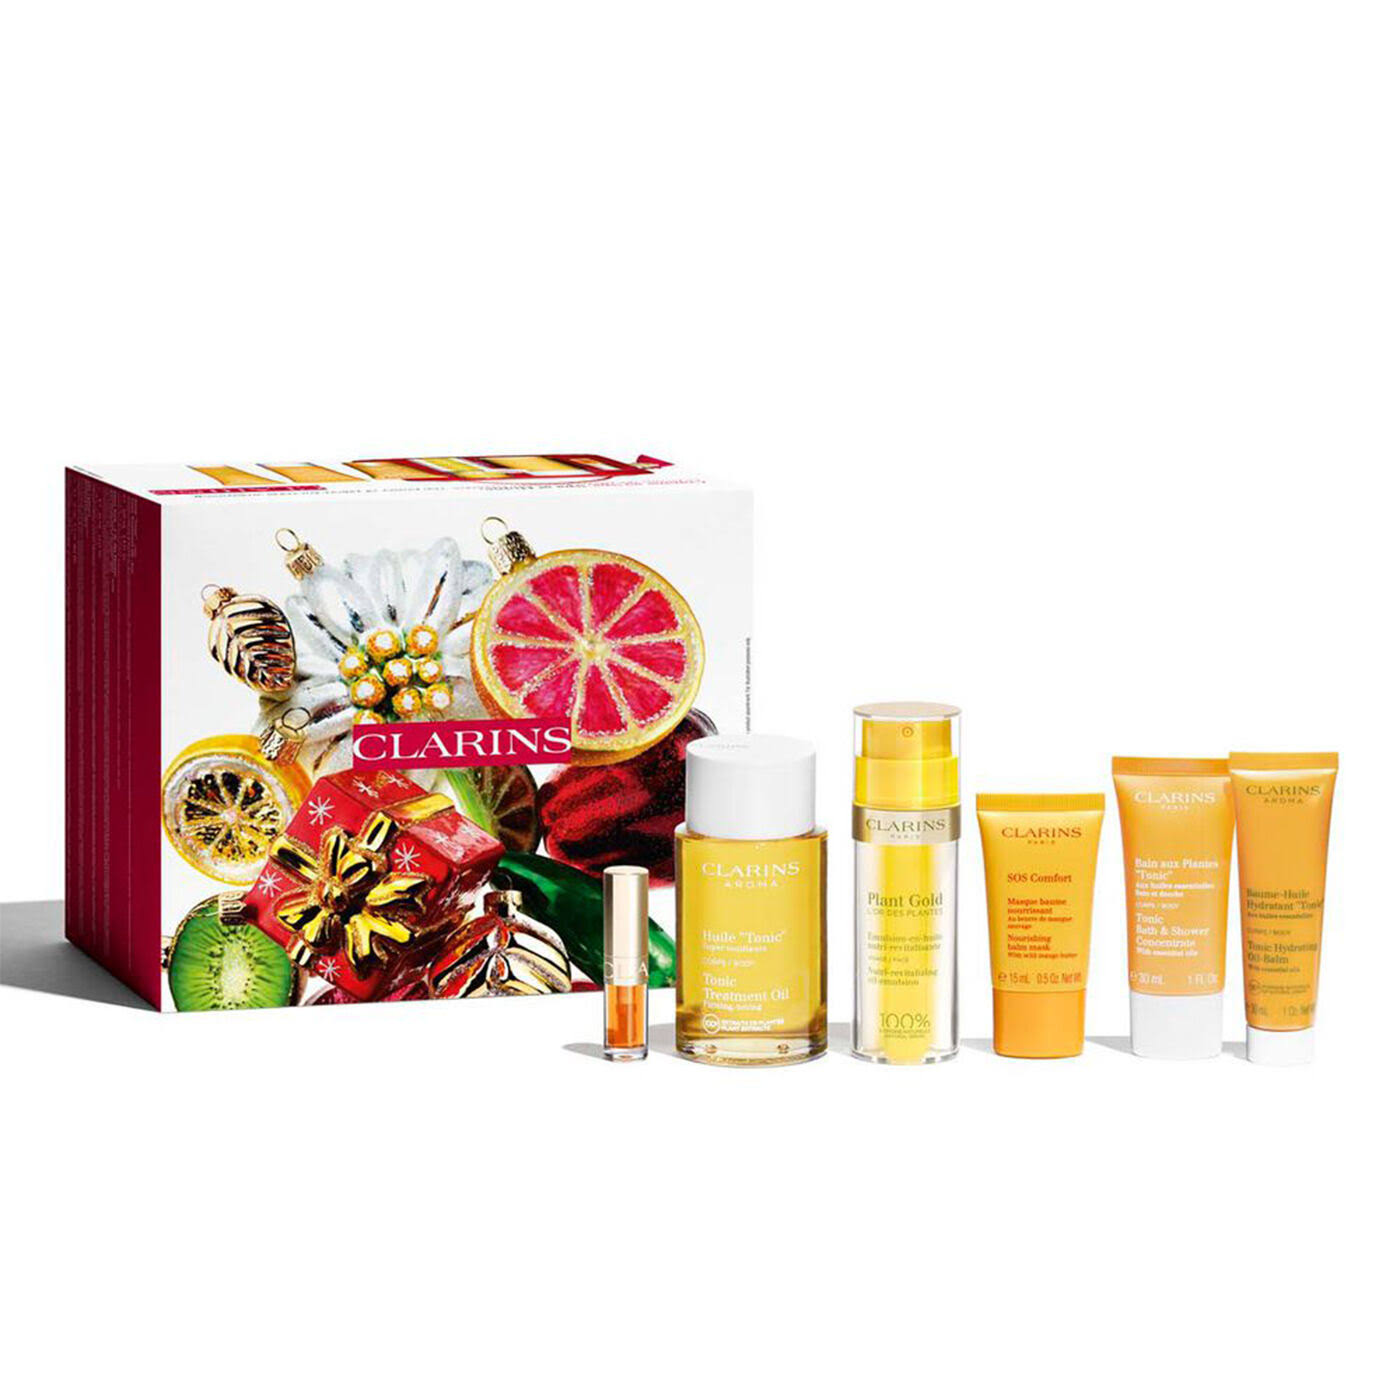 Clarins Spa at Home Coffret